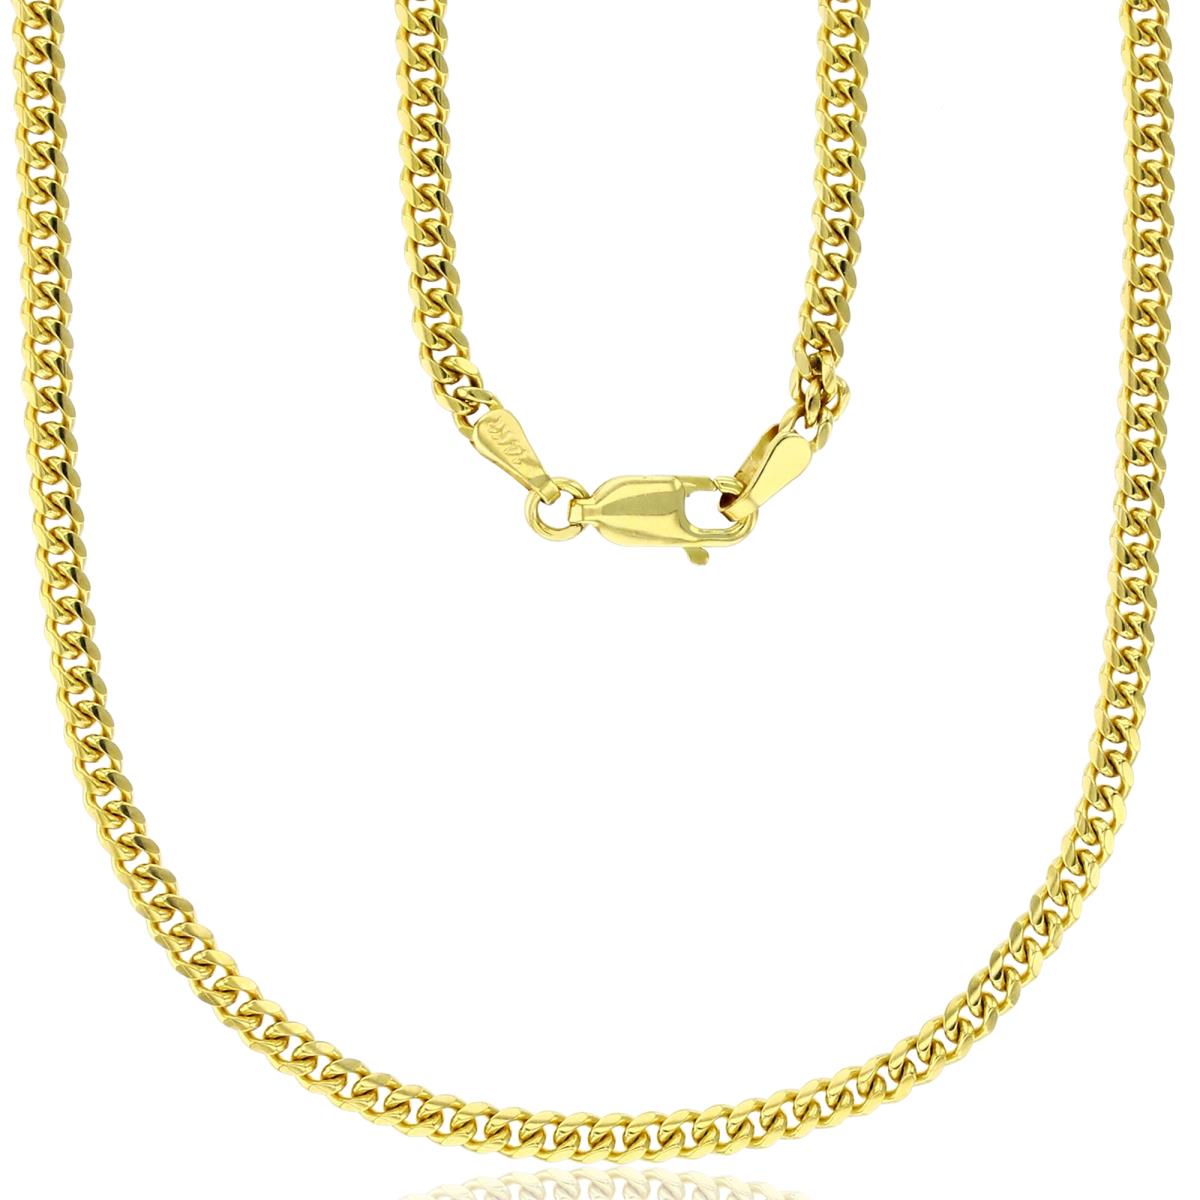 18K Yellow Gold 2.85mm 20" Solid Miami Cuban 080 Chain with Lobster Lock